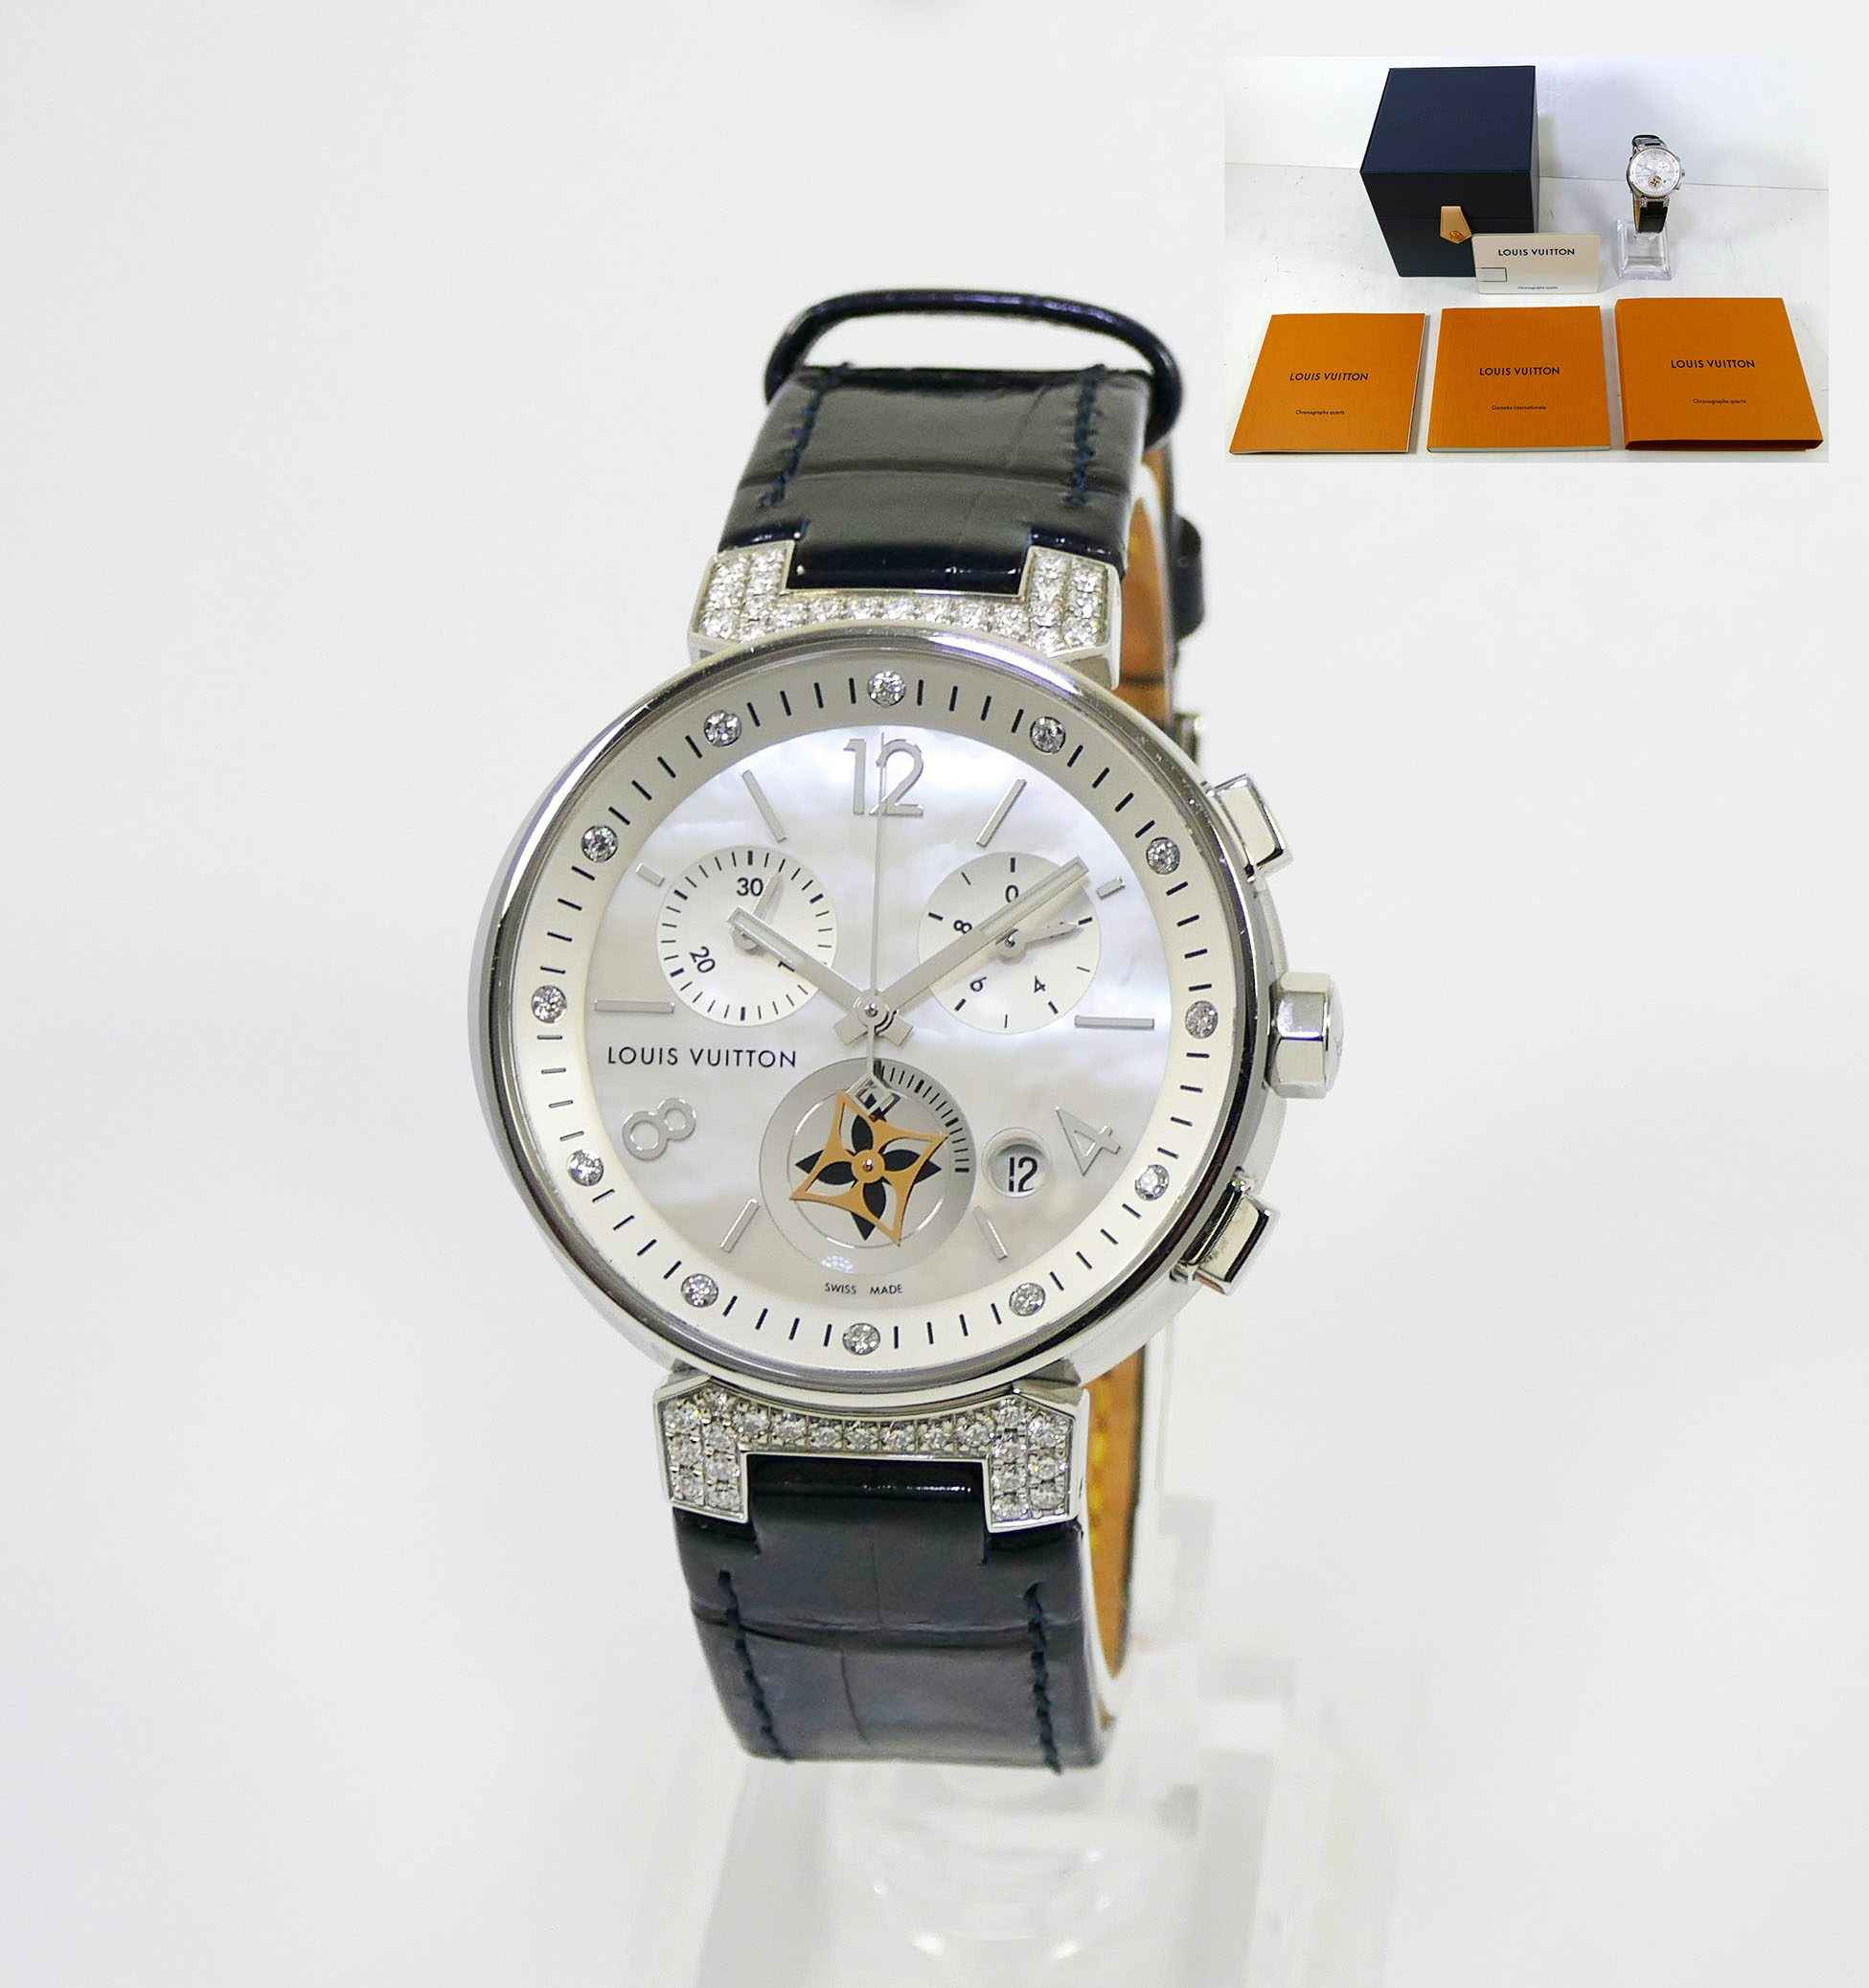 Louis Vuitton Tambour Lady Chronograph for $2,362 for sale from a